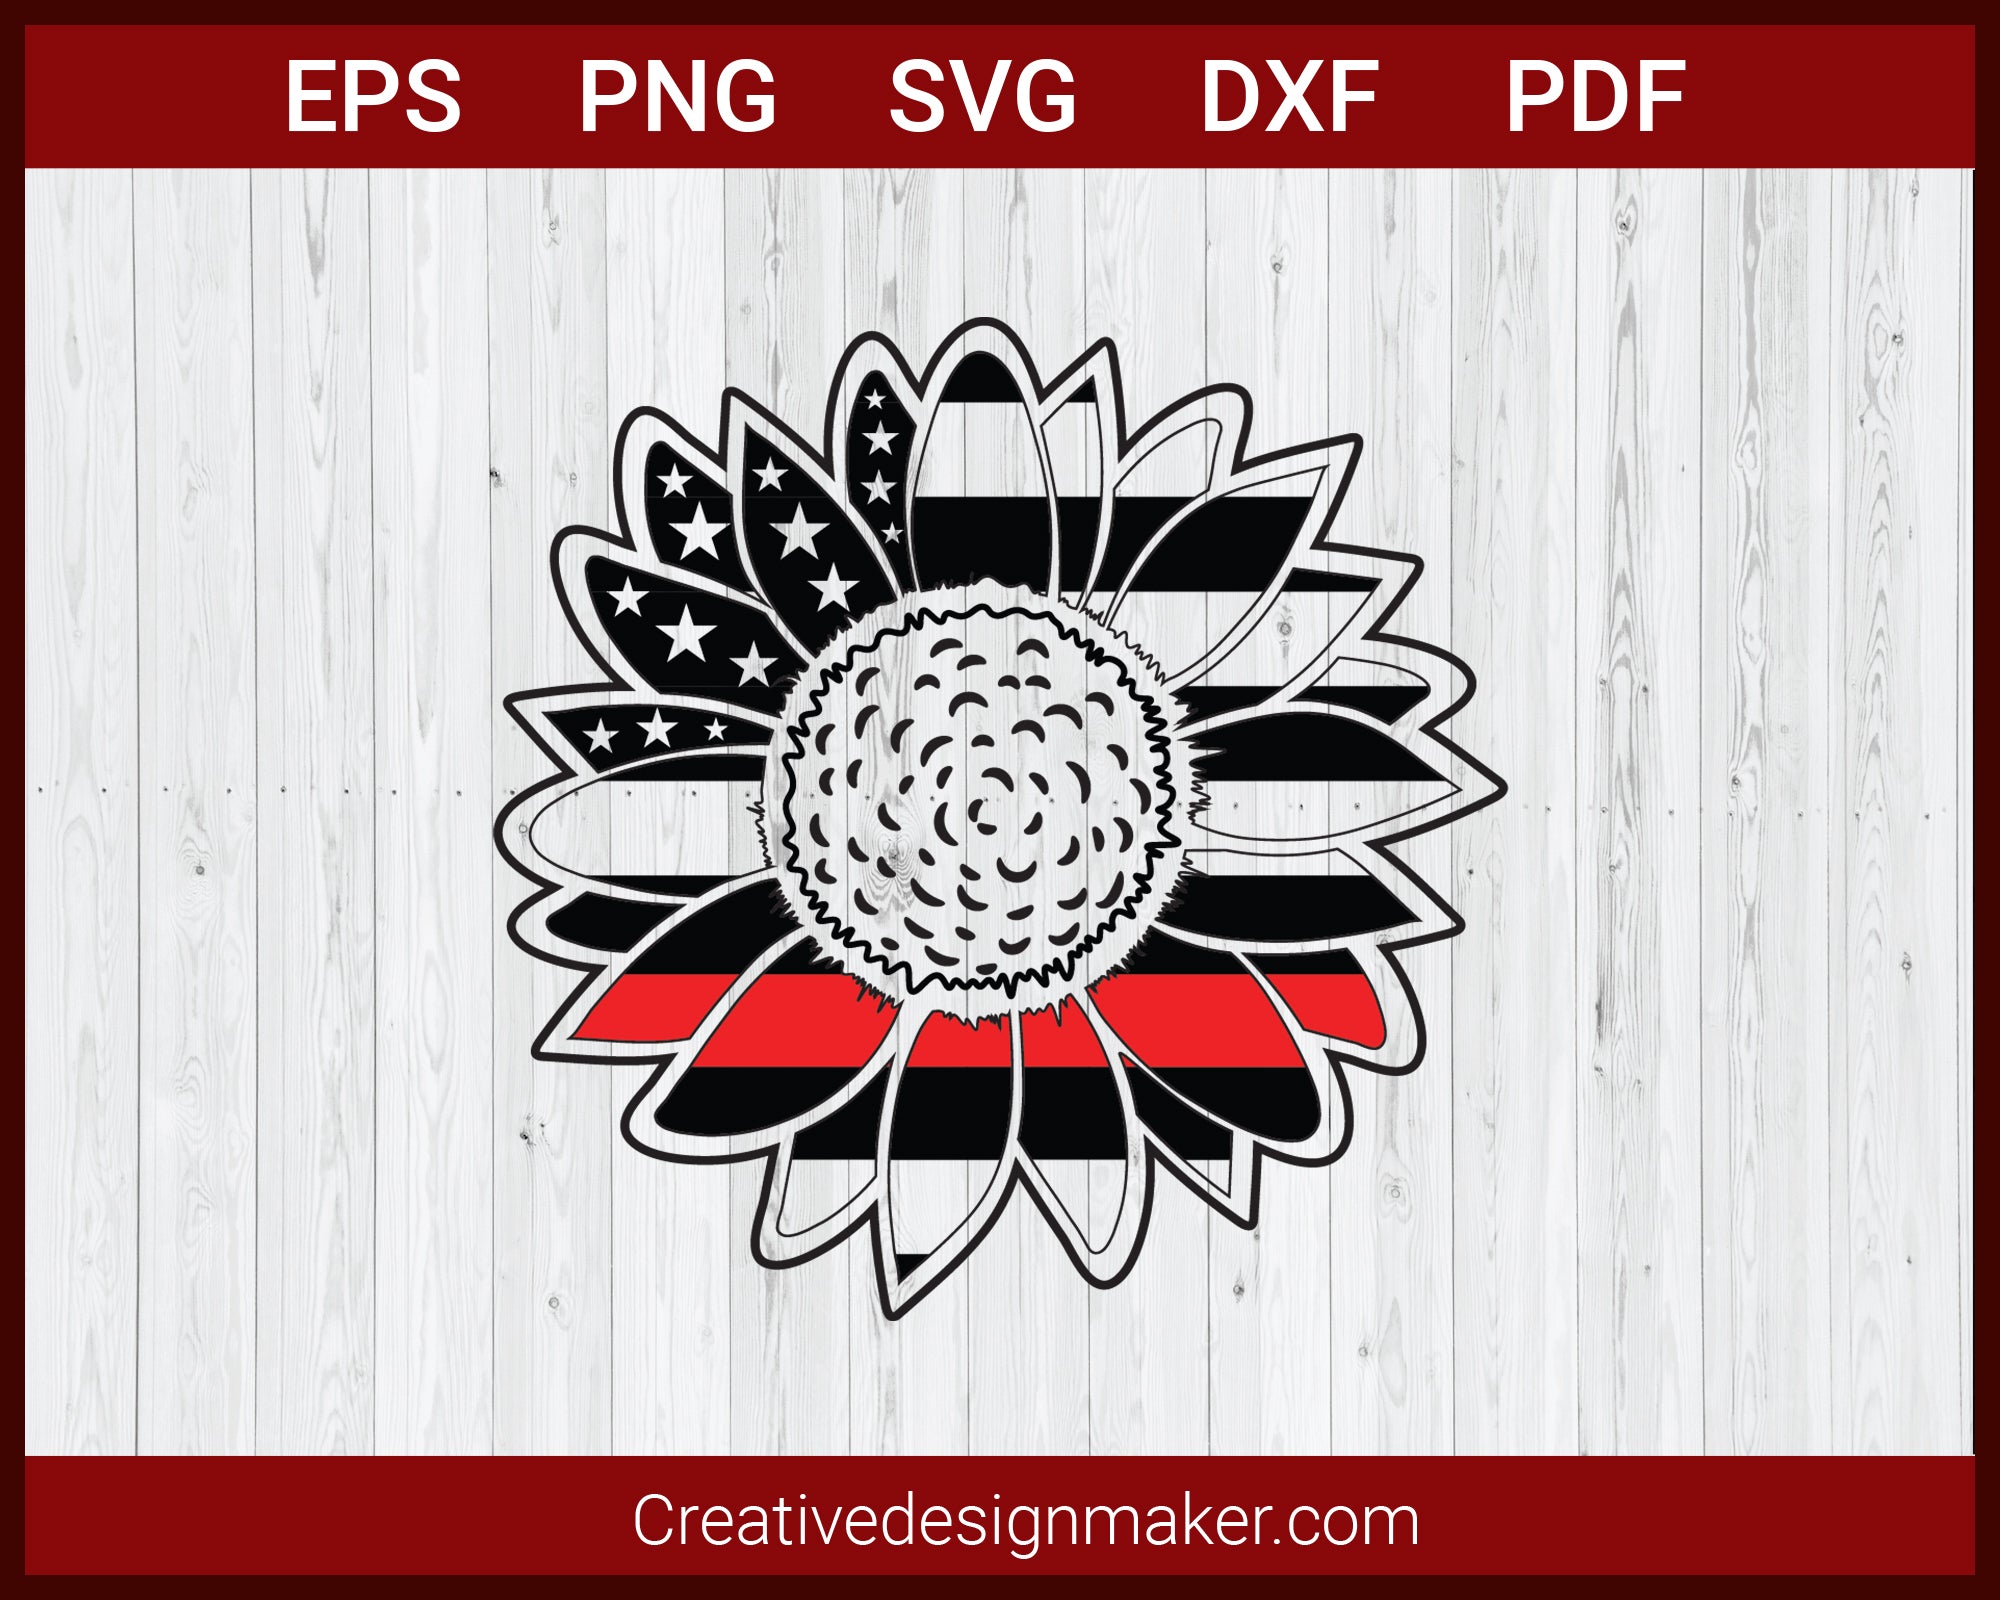 Download Thin Red Line Sunflower Svg Cricut Silhouette Dxf Png Eps Cut File Creativedesignmaker